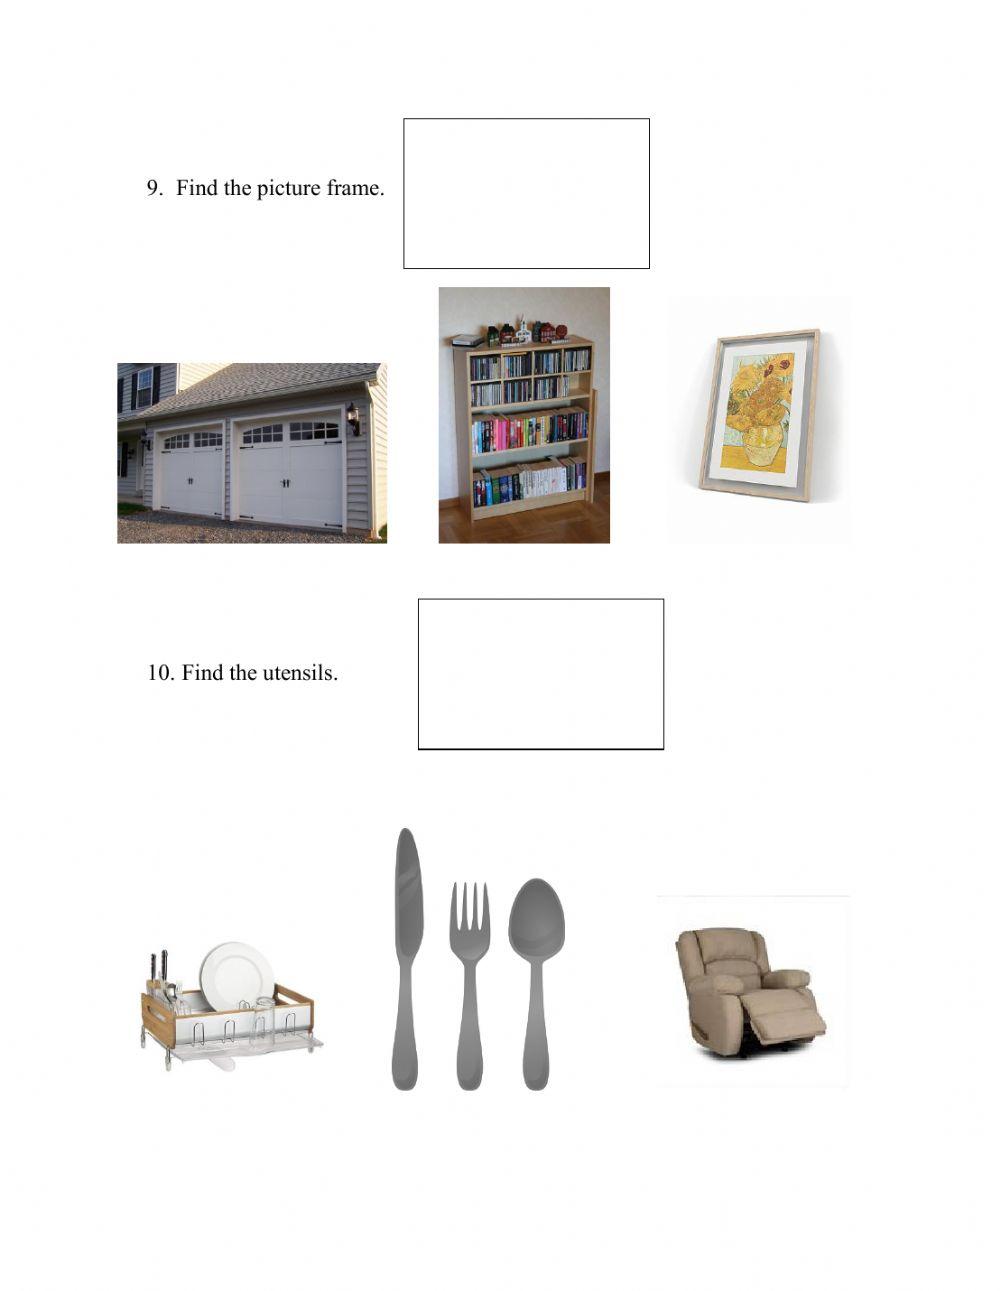 Find house items 9